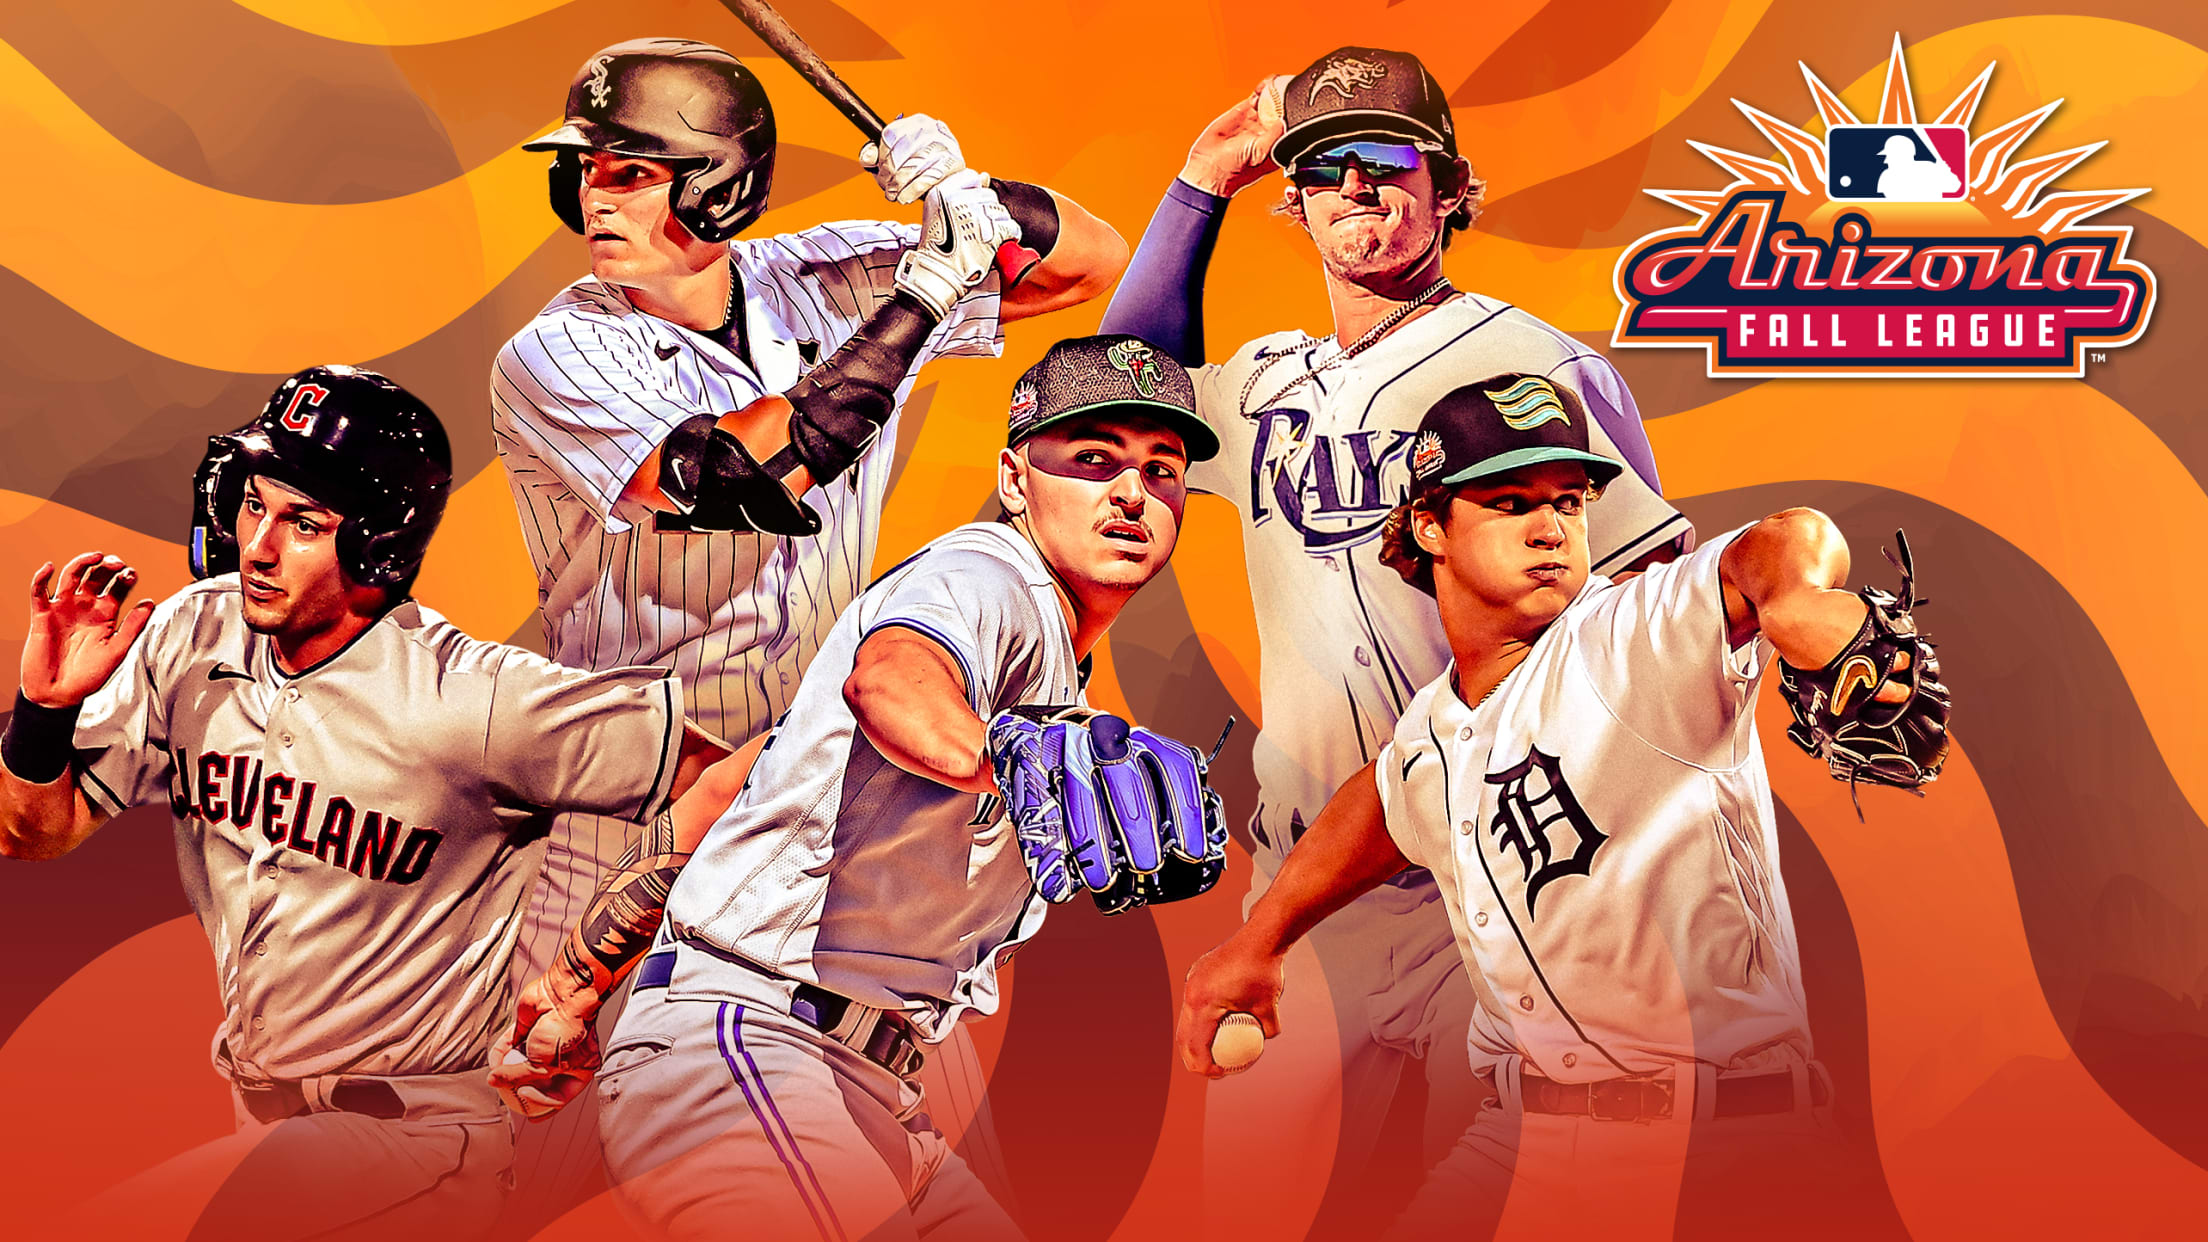 A photo illustration of 5 prospects in the Arizona Fall League